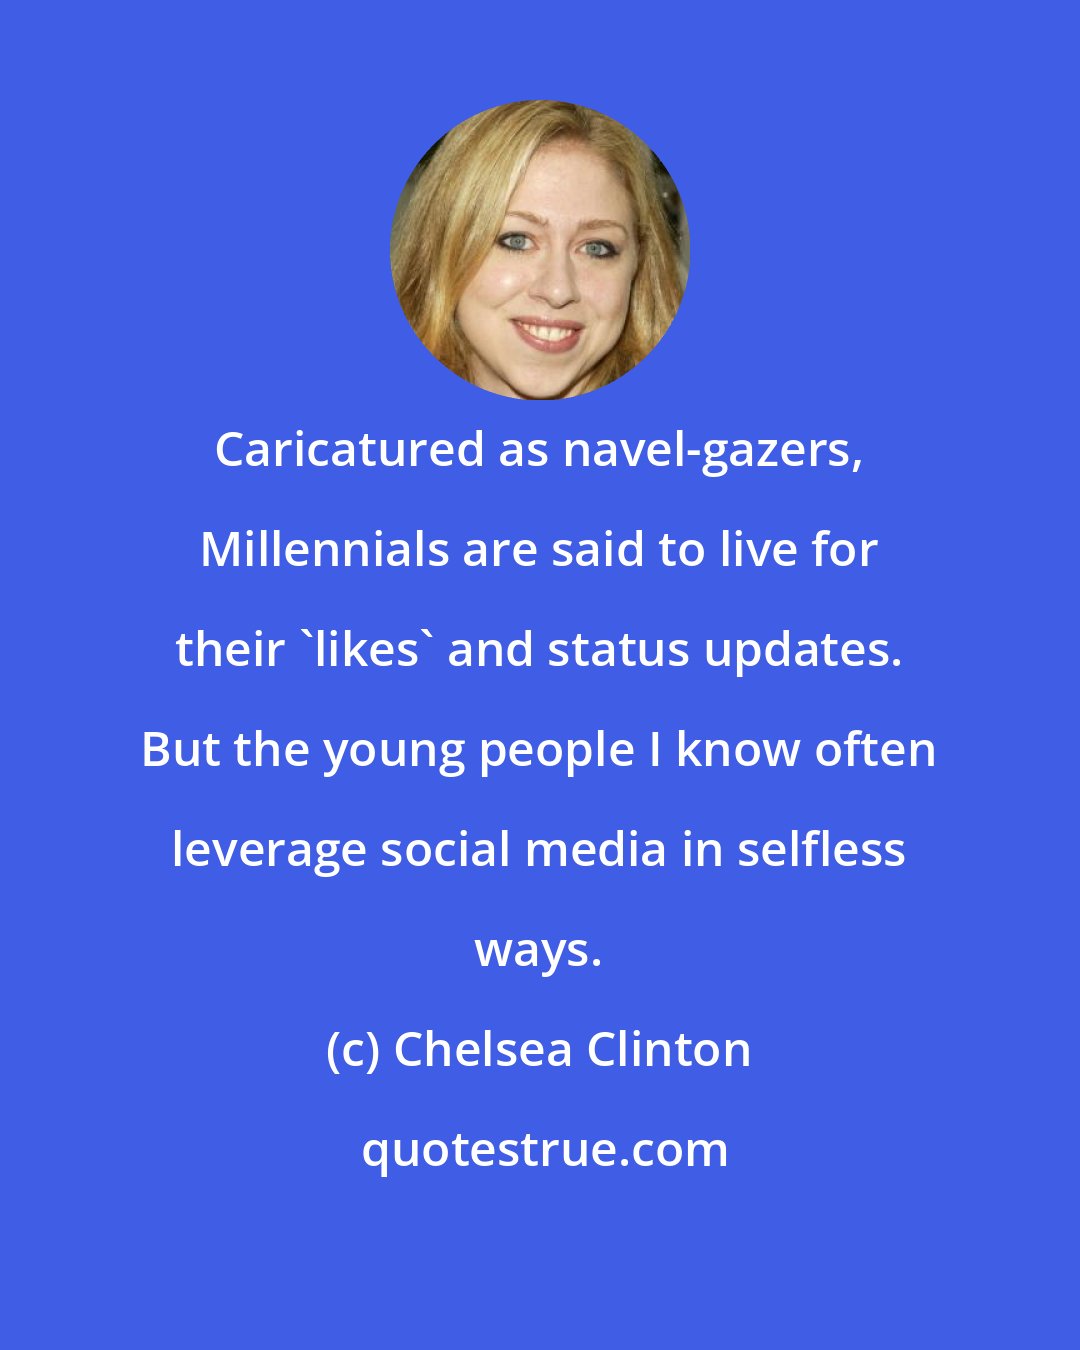 Chelsea Clinton: Caricatured as navel-gazers, Millennials are said to live for their 'likes' and status updates. But the young people I know often leverage social media in selfless ways.